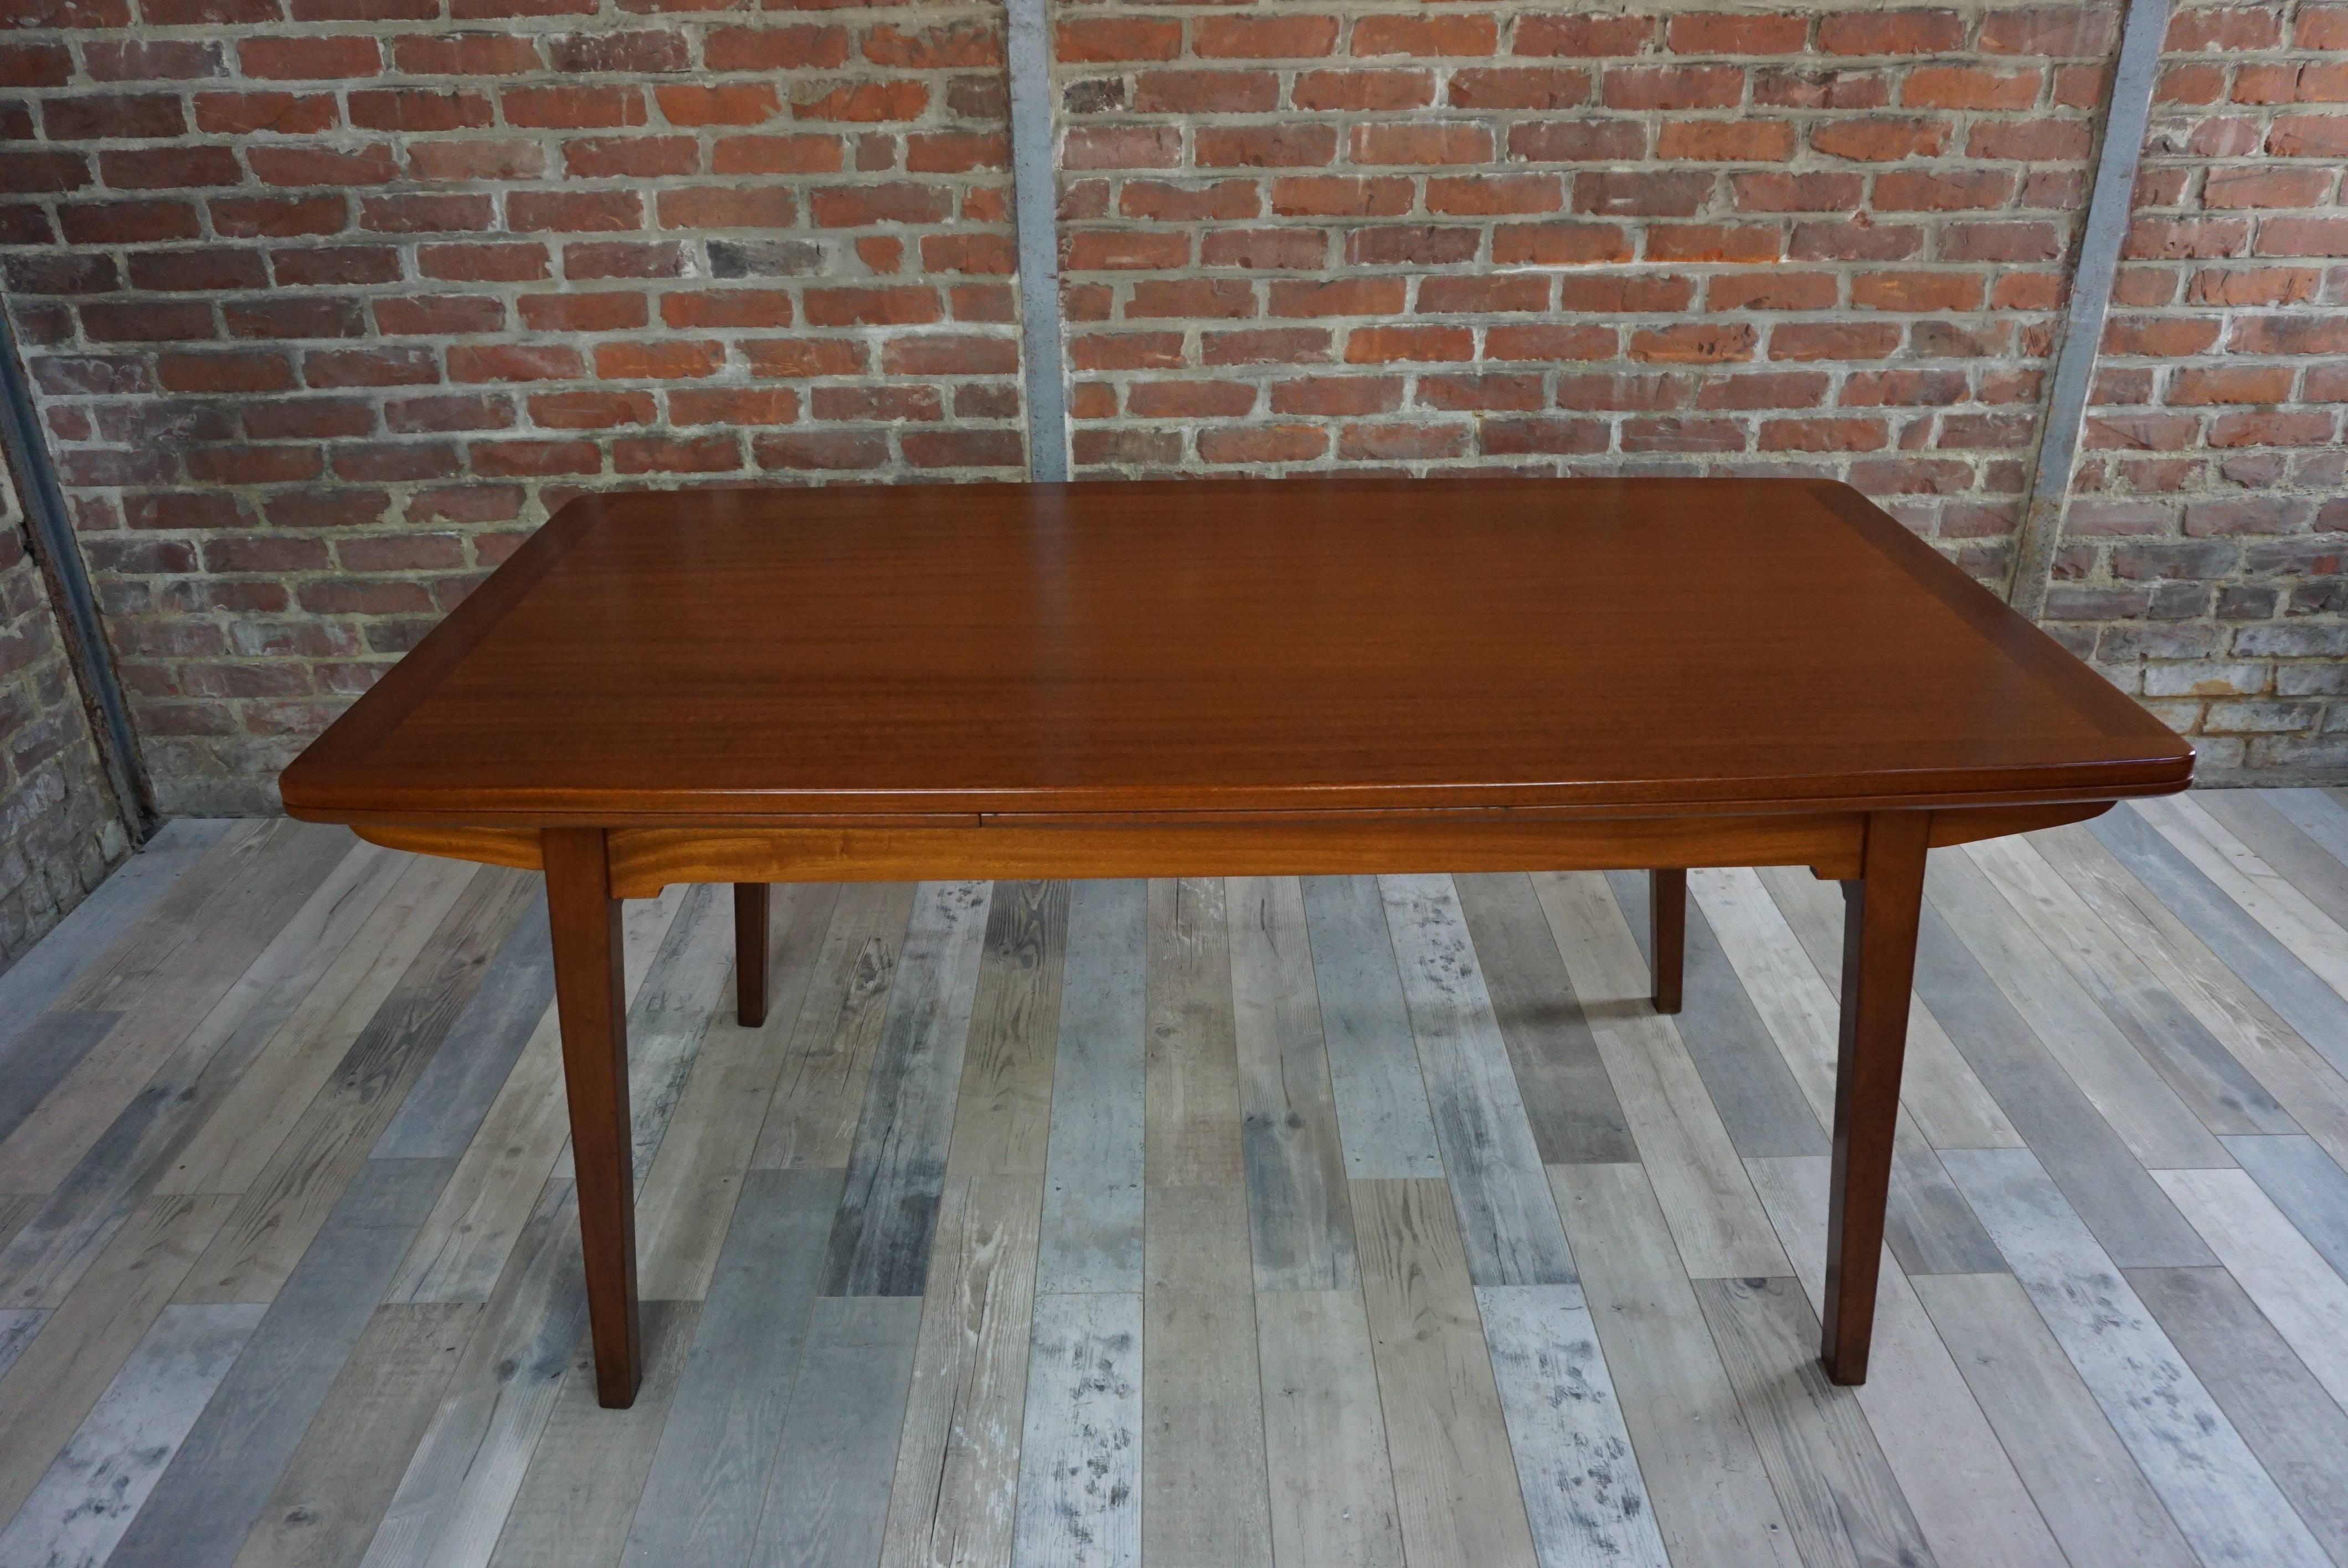 Mid-20th Century Dining Teck Table of the 1950s Design by Jos De Mey for Van Der Berghe Furniture